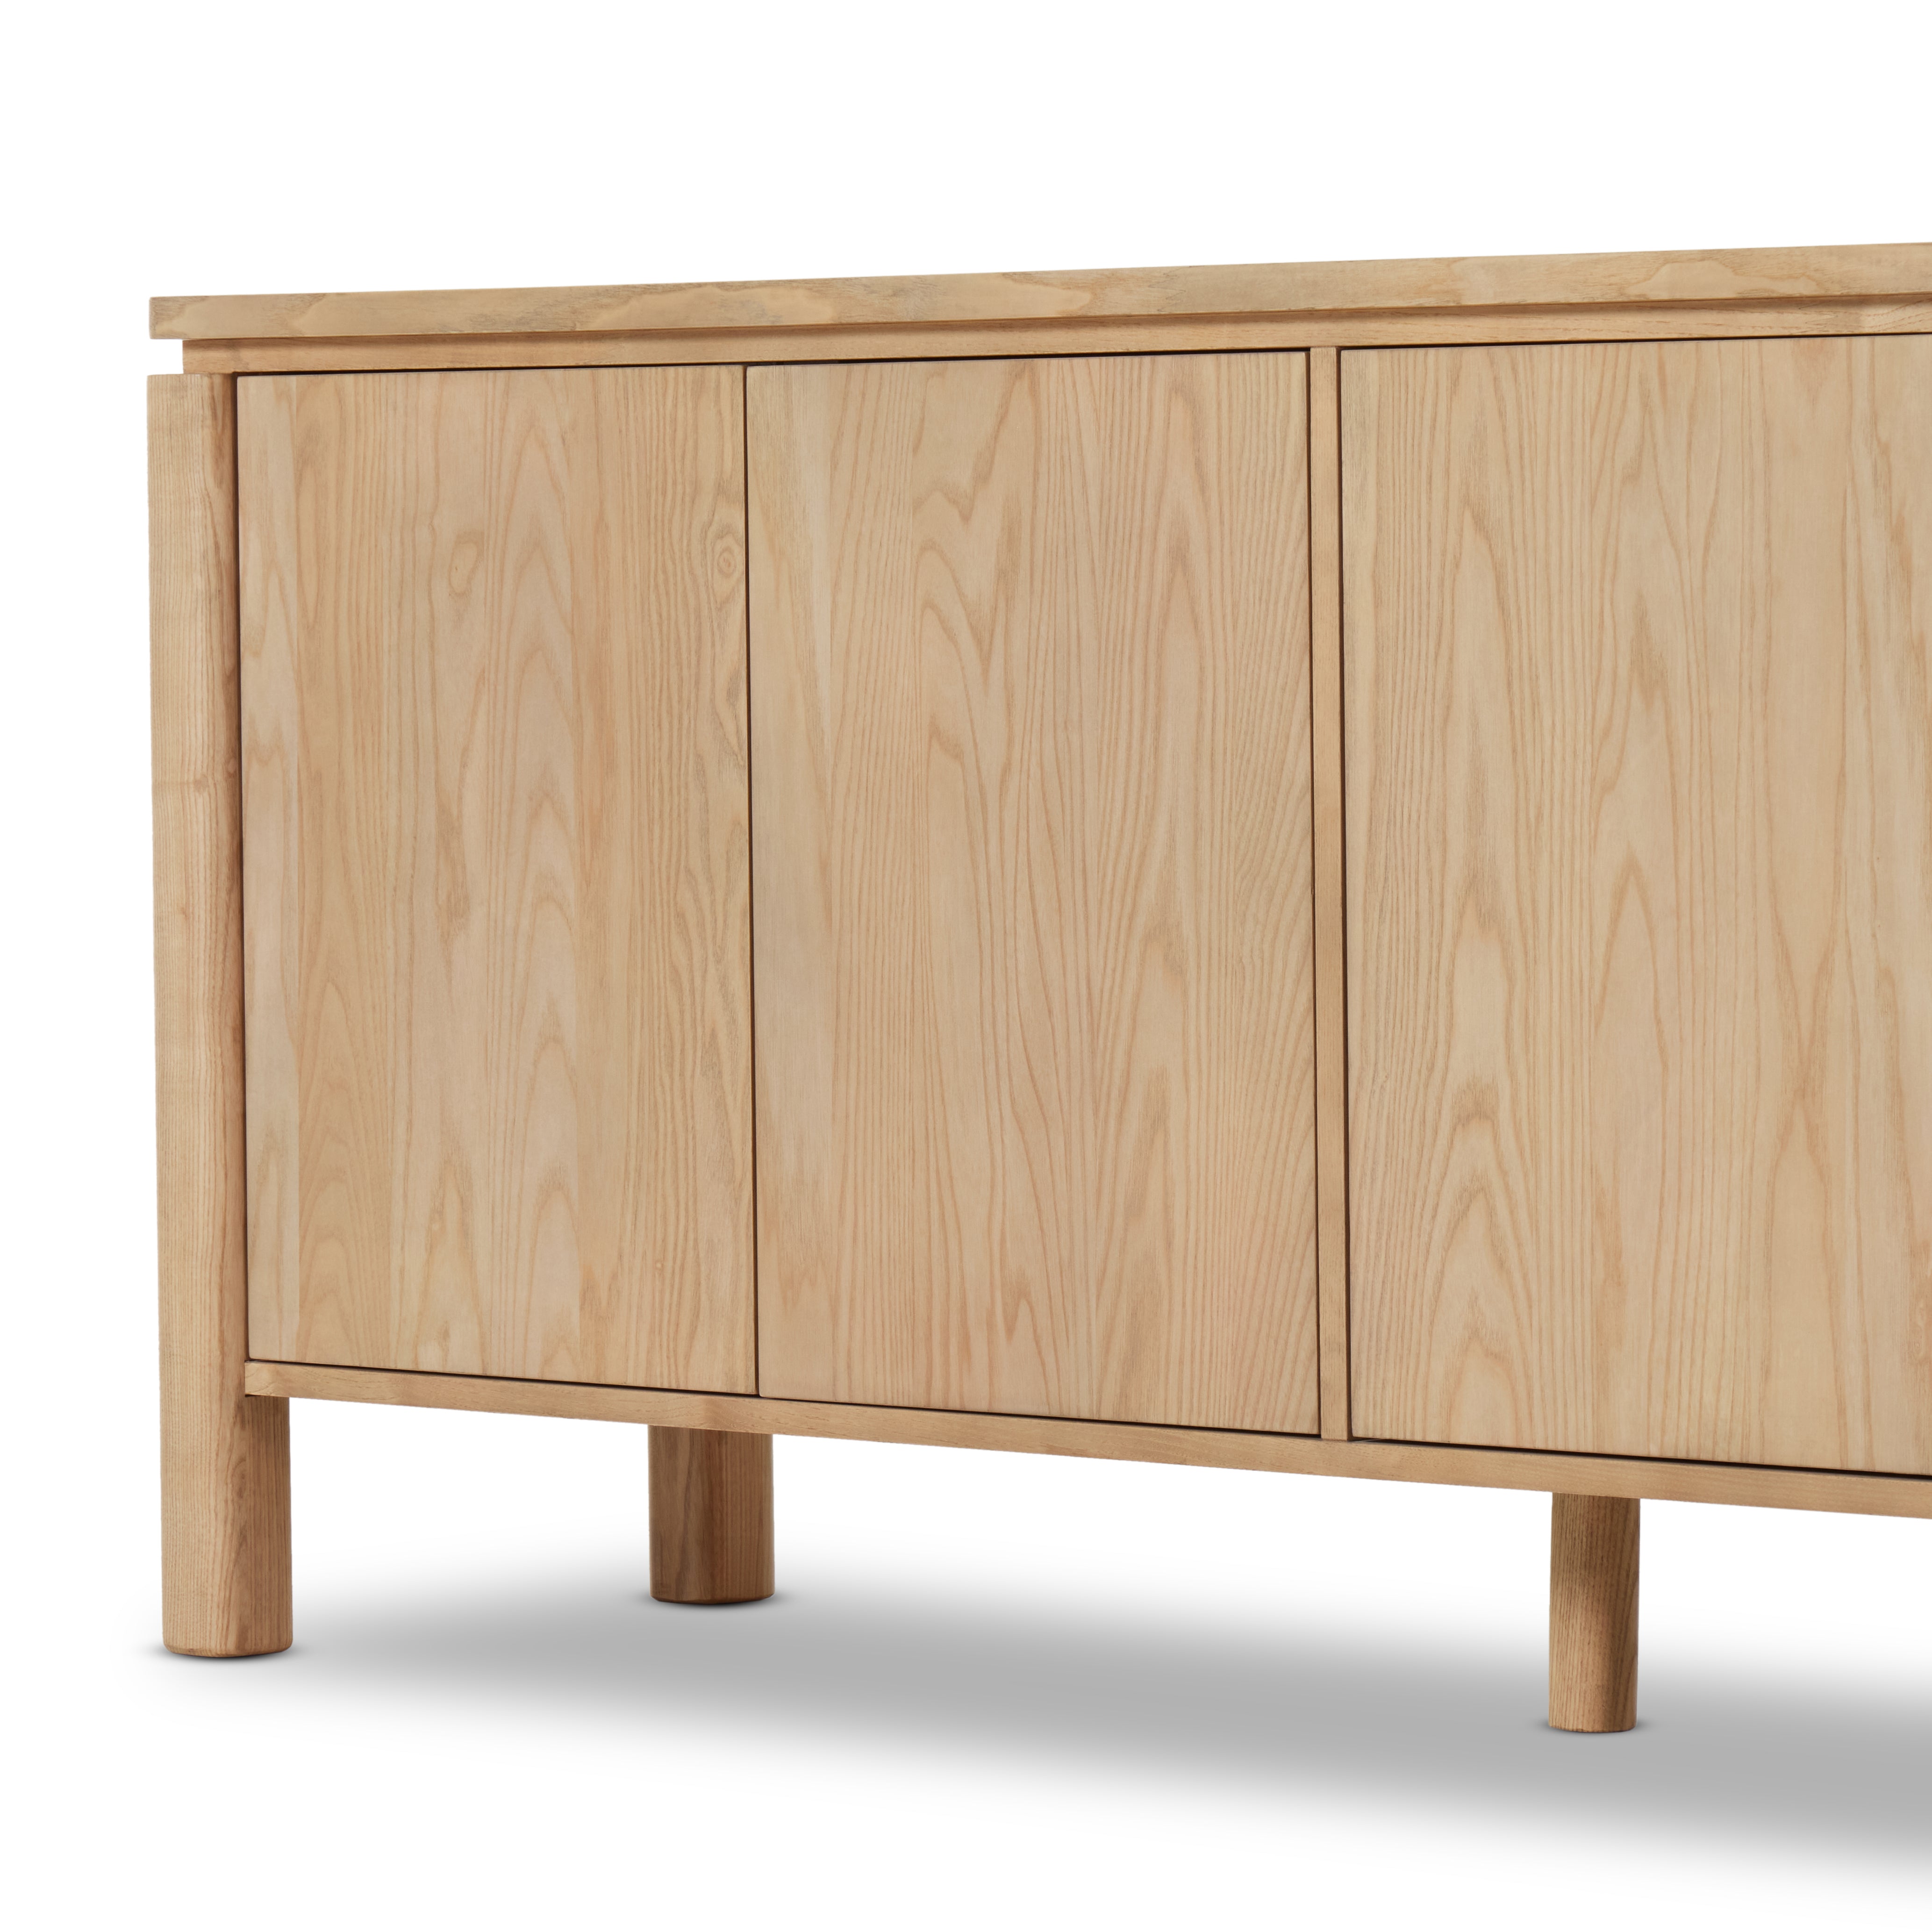 Large, rounded legs support this sleek sideboard with a reveal detail at the top. A beautiful ash finish showcases and highlights the natural wood grain. Amethyst Home provides interior design, new construction, custom furniture, and area rugs in the Portland metro area.